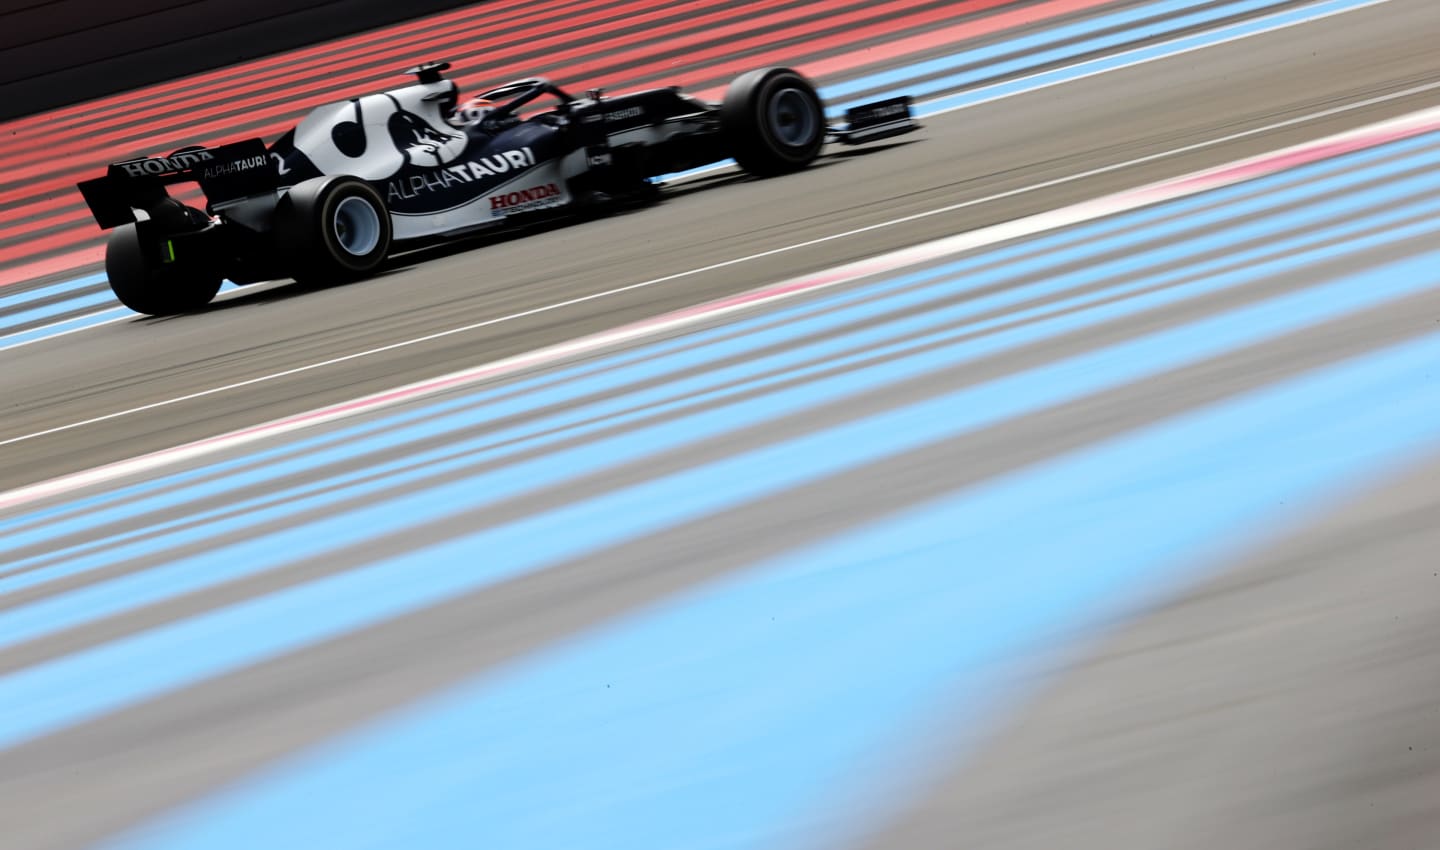 LE CASTELLET, FRANCE - JUNE 20: Yuki Tsunoda of Japan driving the (22) Scuderia AlphaTauri AT02 Honda on track during the F1 Grand Prix of France at Circuit Paul Ricard on June 20, 2021 in Le Castellet, France. (Photo by Clive Rose/Getty Images)